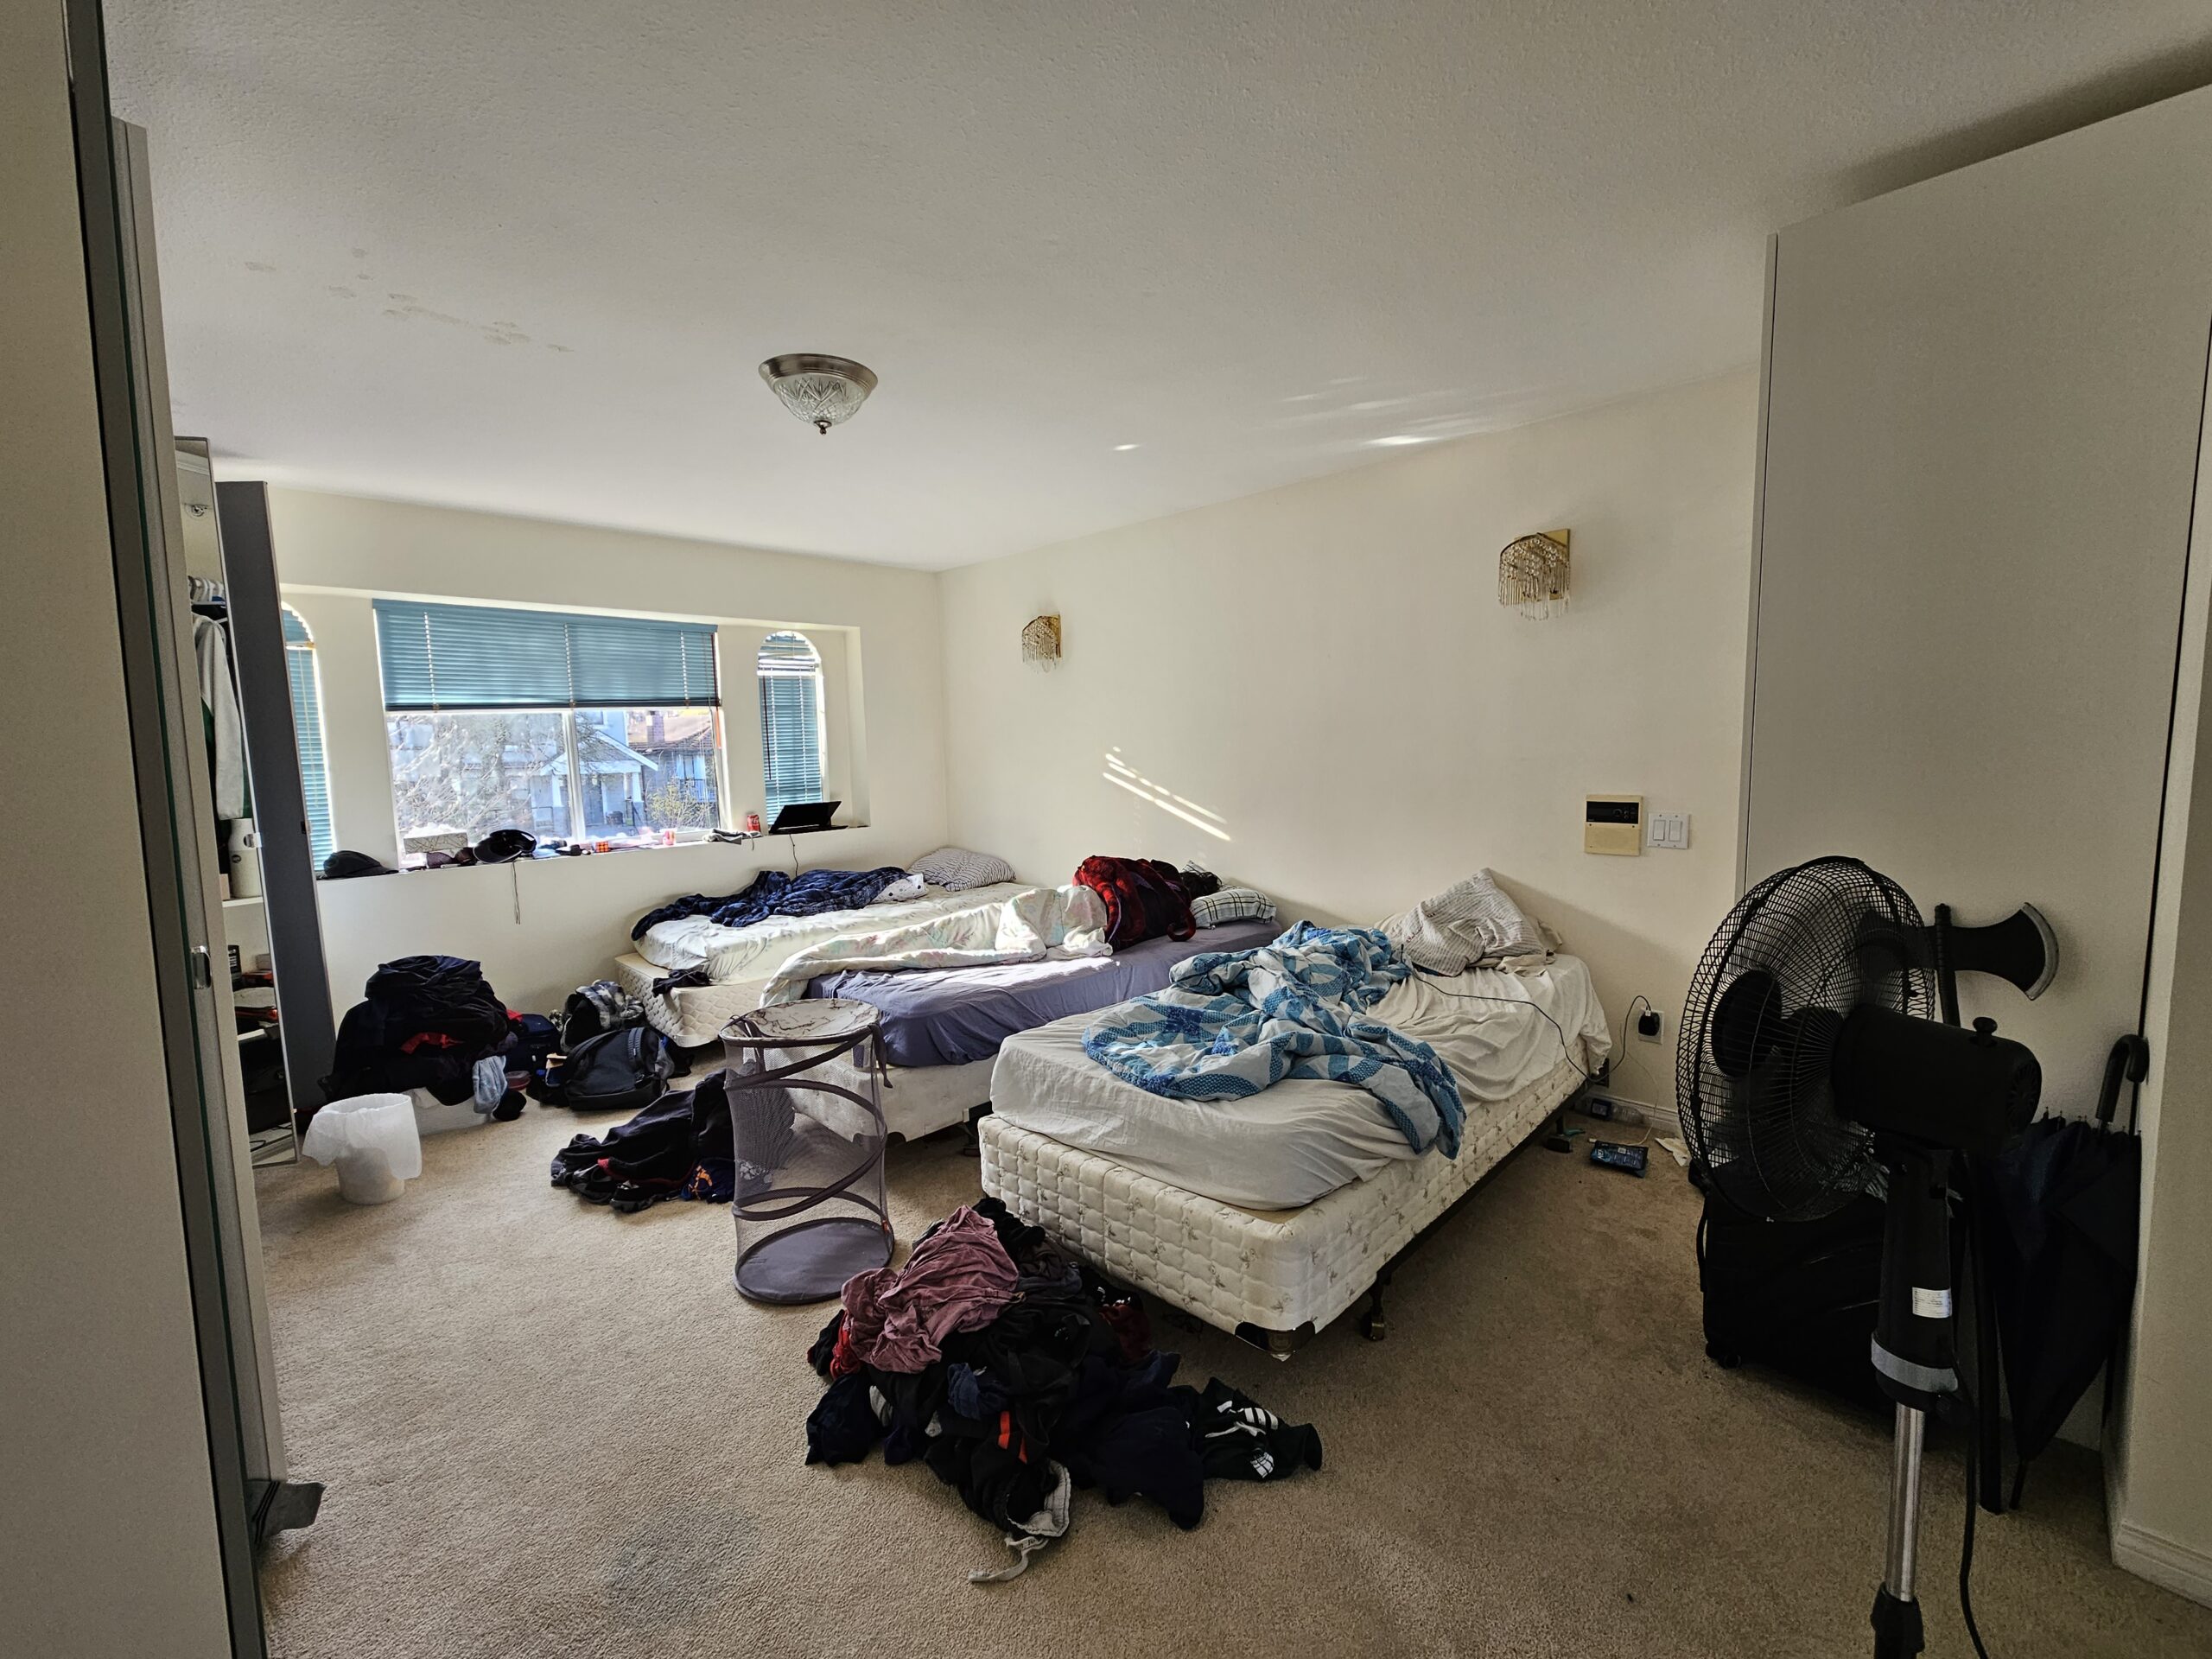 Leo Malamug's rented room that he shares with two other students. The room has three beds with clothes and various belongings on them.